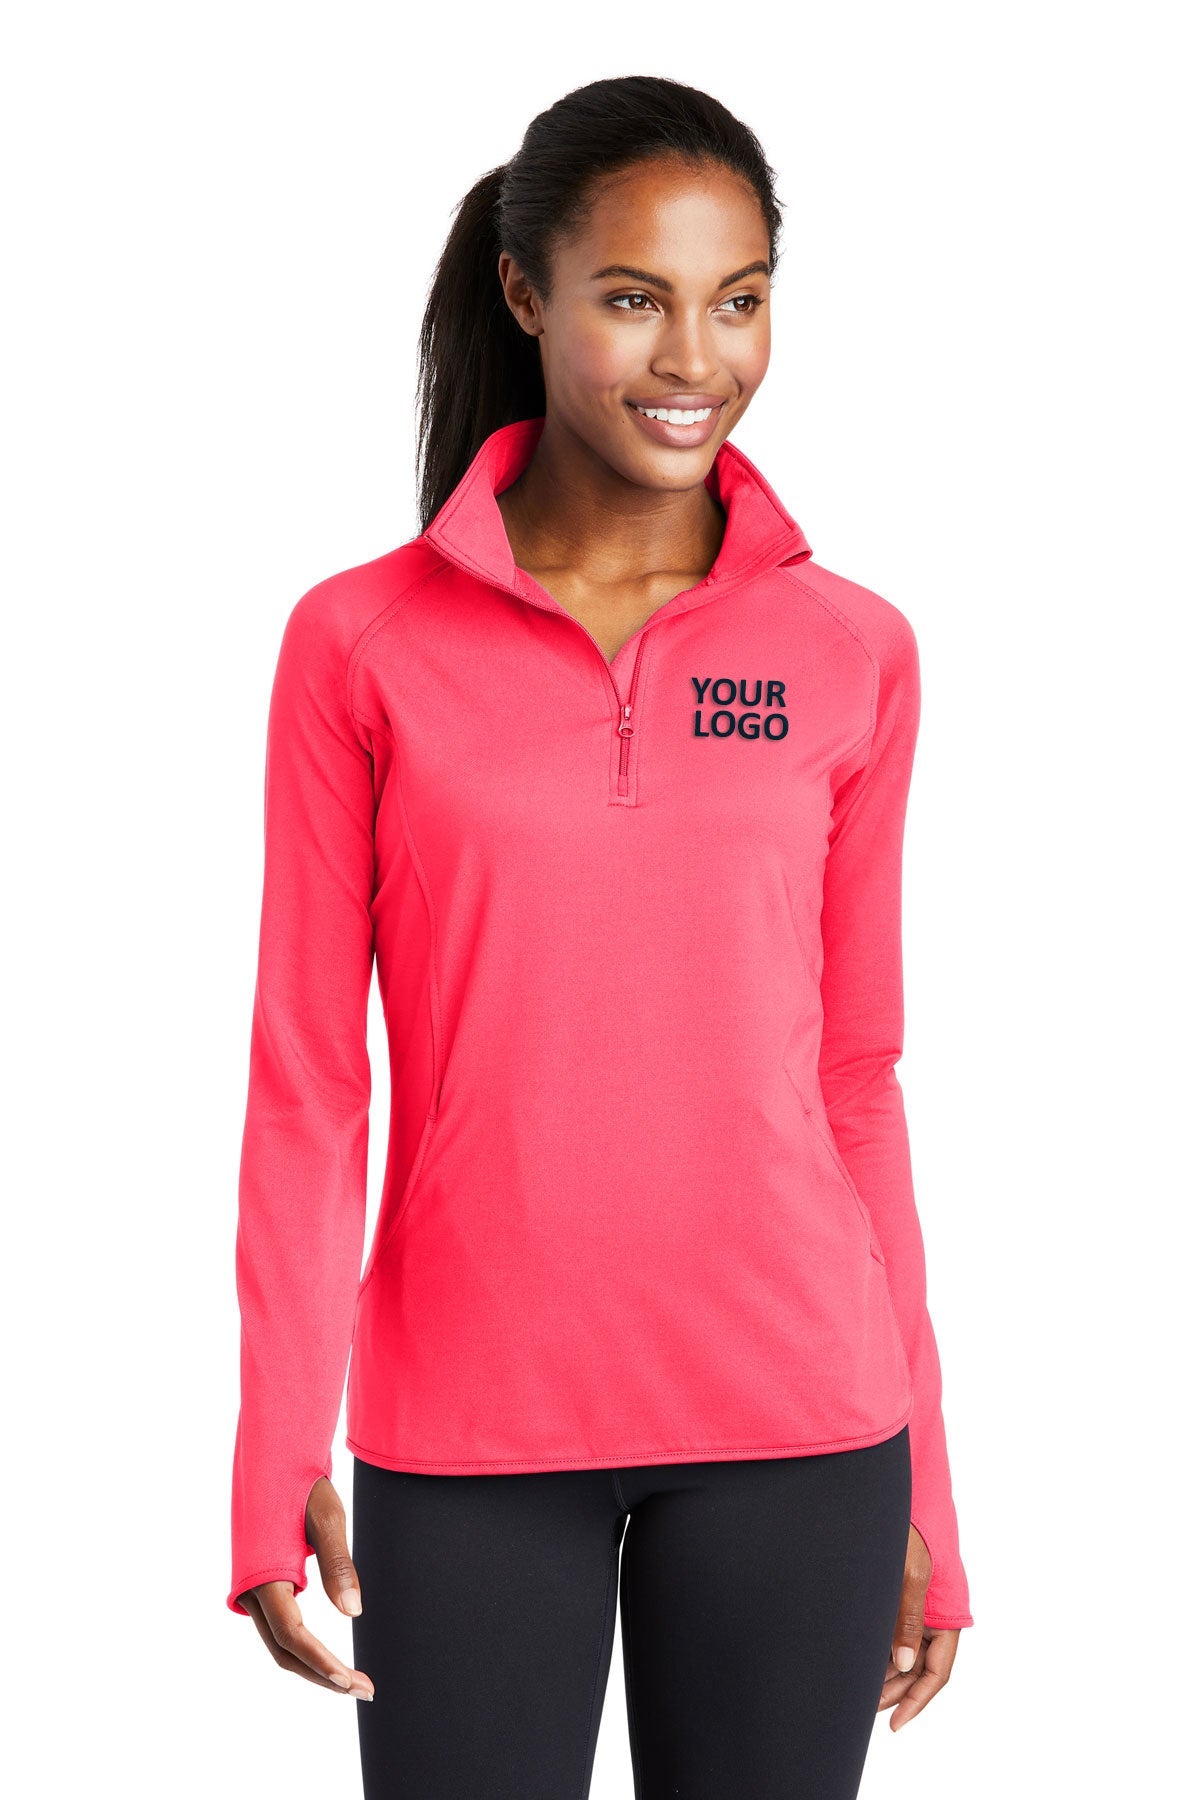 Sport-Tek Hot Coral LST850 company sweatshirts embroidered